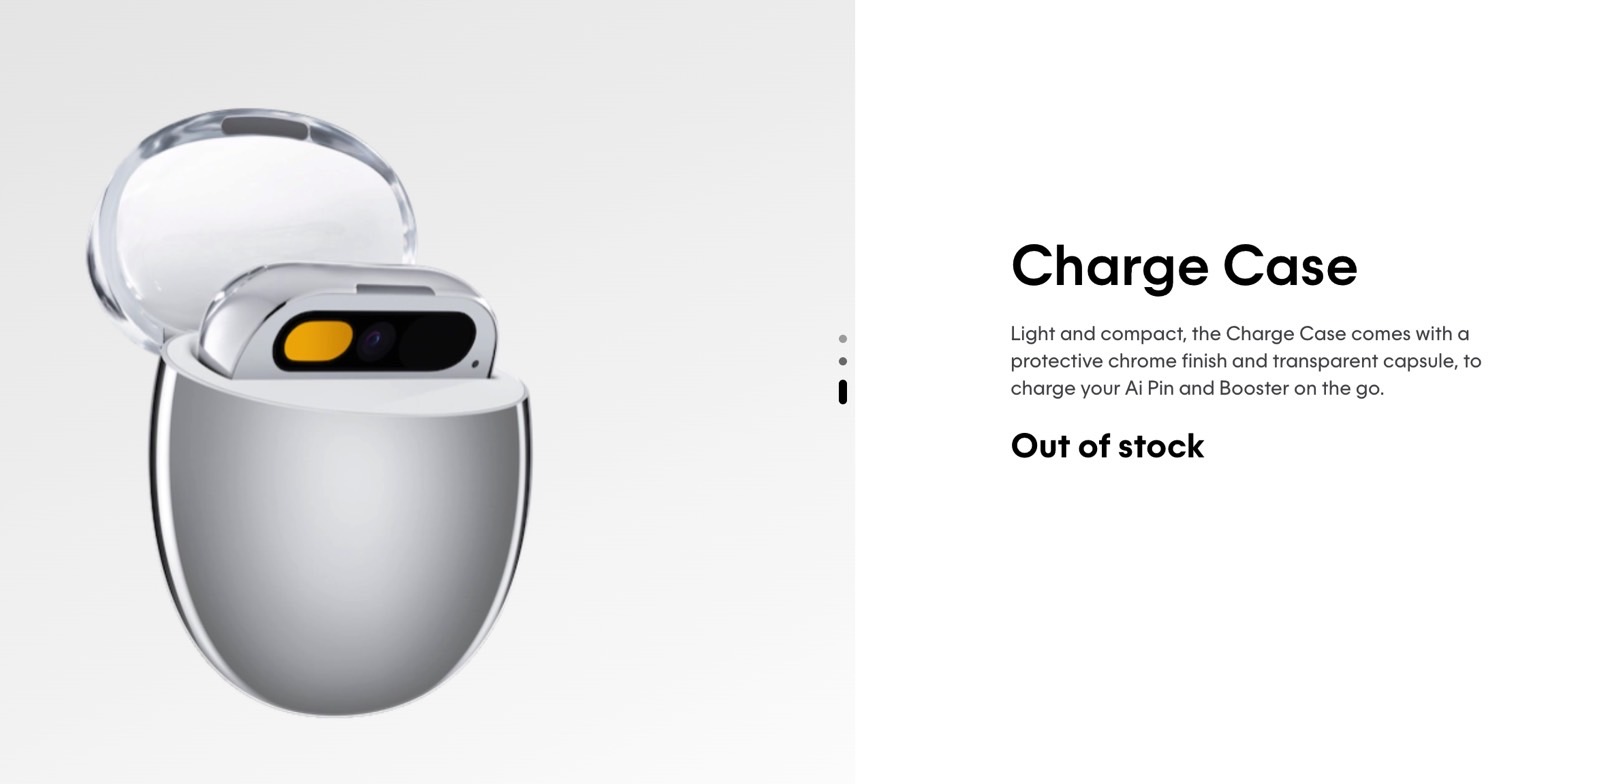 Humane Ai Pin Charge Case accessory is no longer available to purchase.